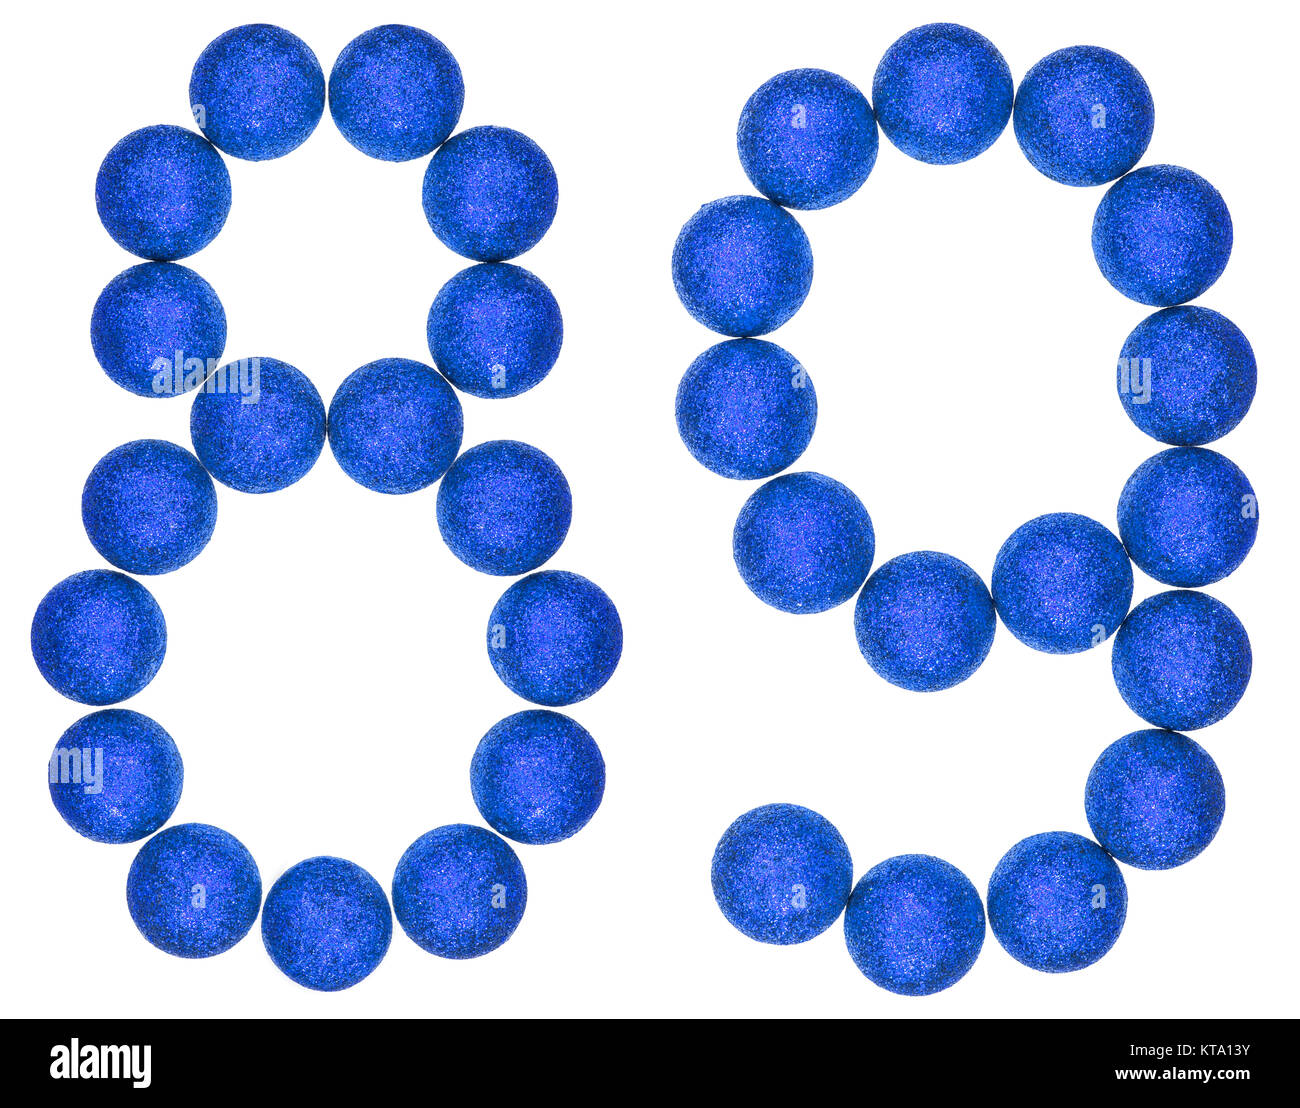 Numeral 89, eighty nine, from decorative balls, isolated on white background Stock Photo